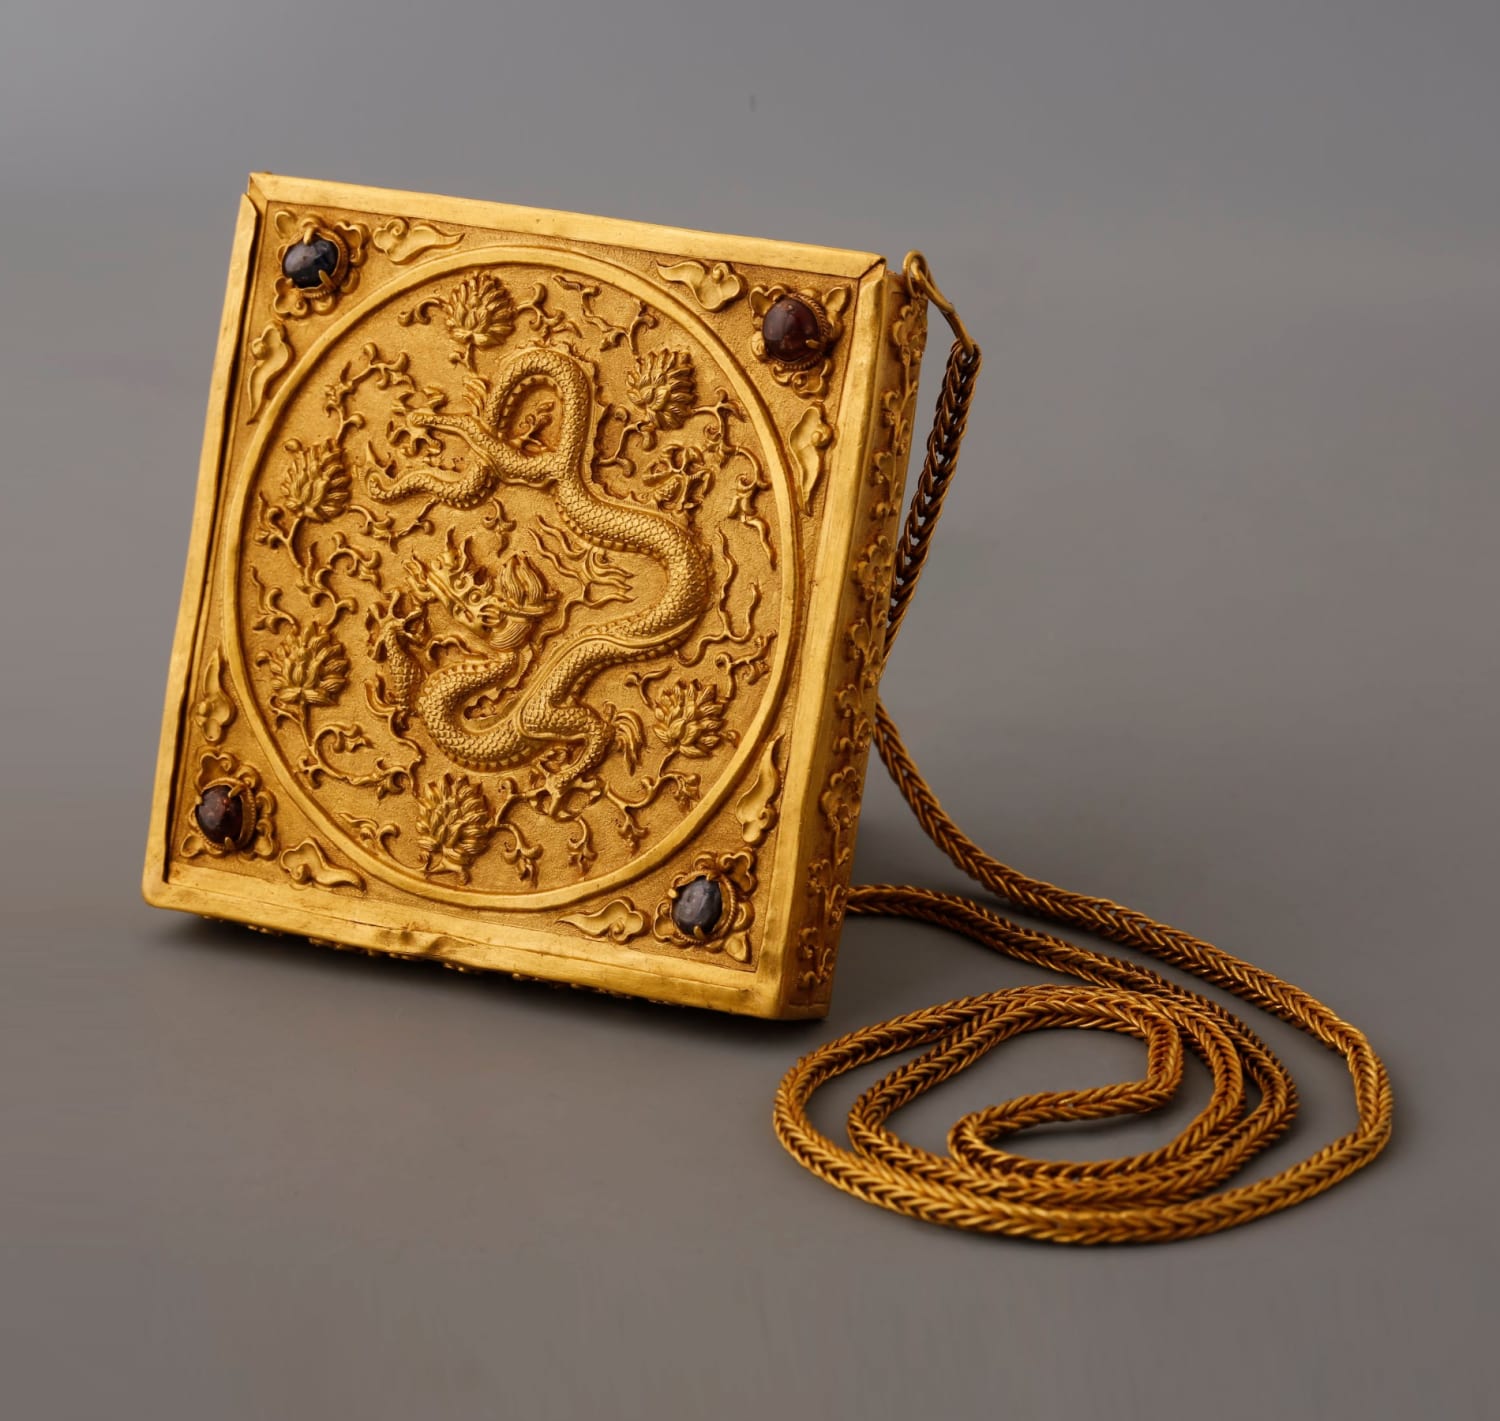 Flat gold box with gold chain. China, Ming Dynasty, around 1500